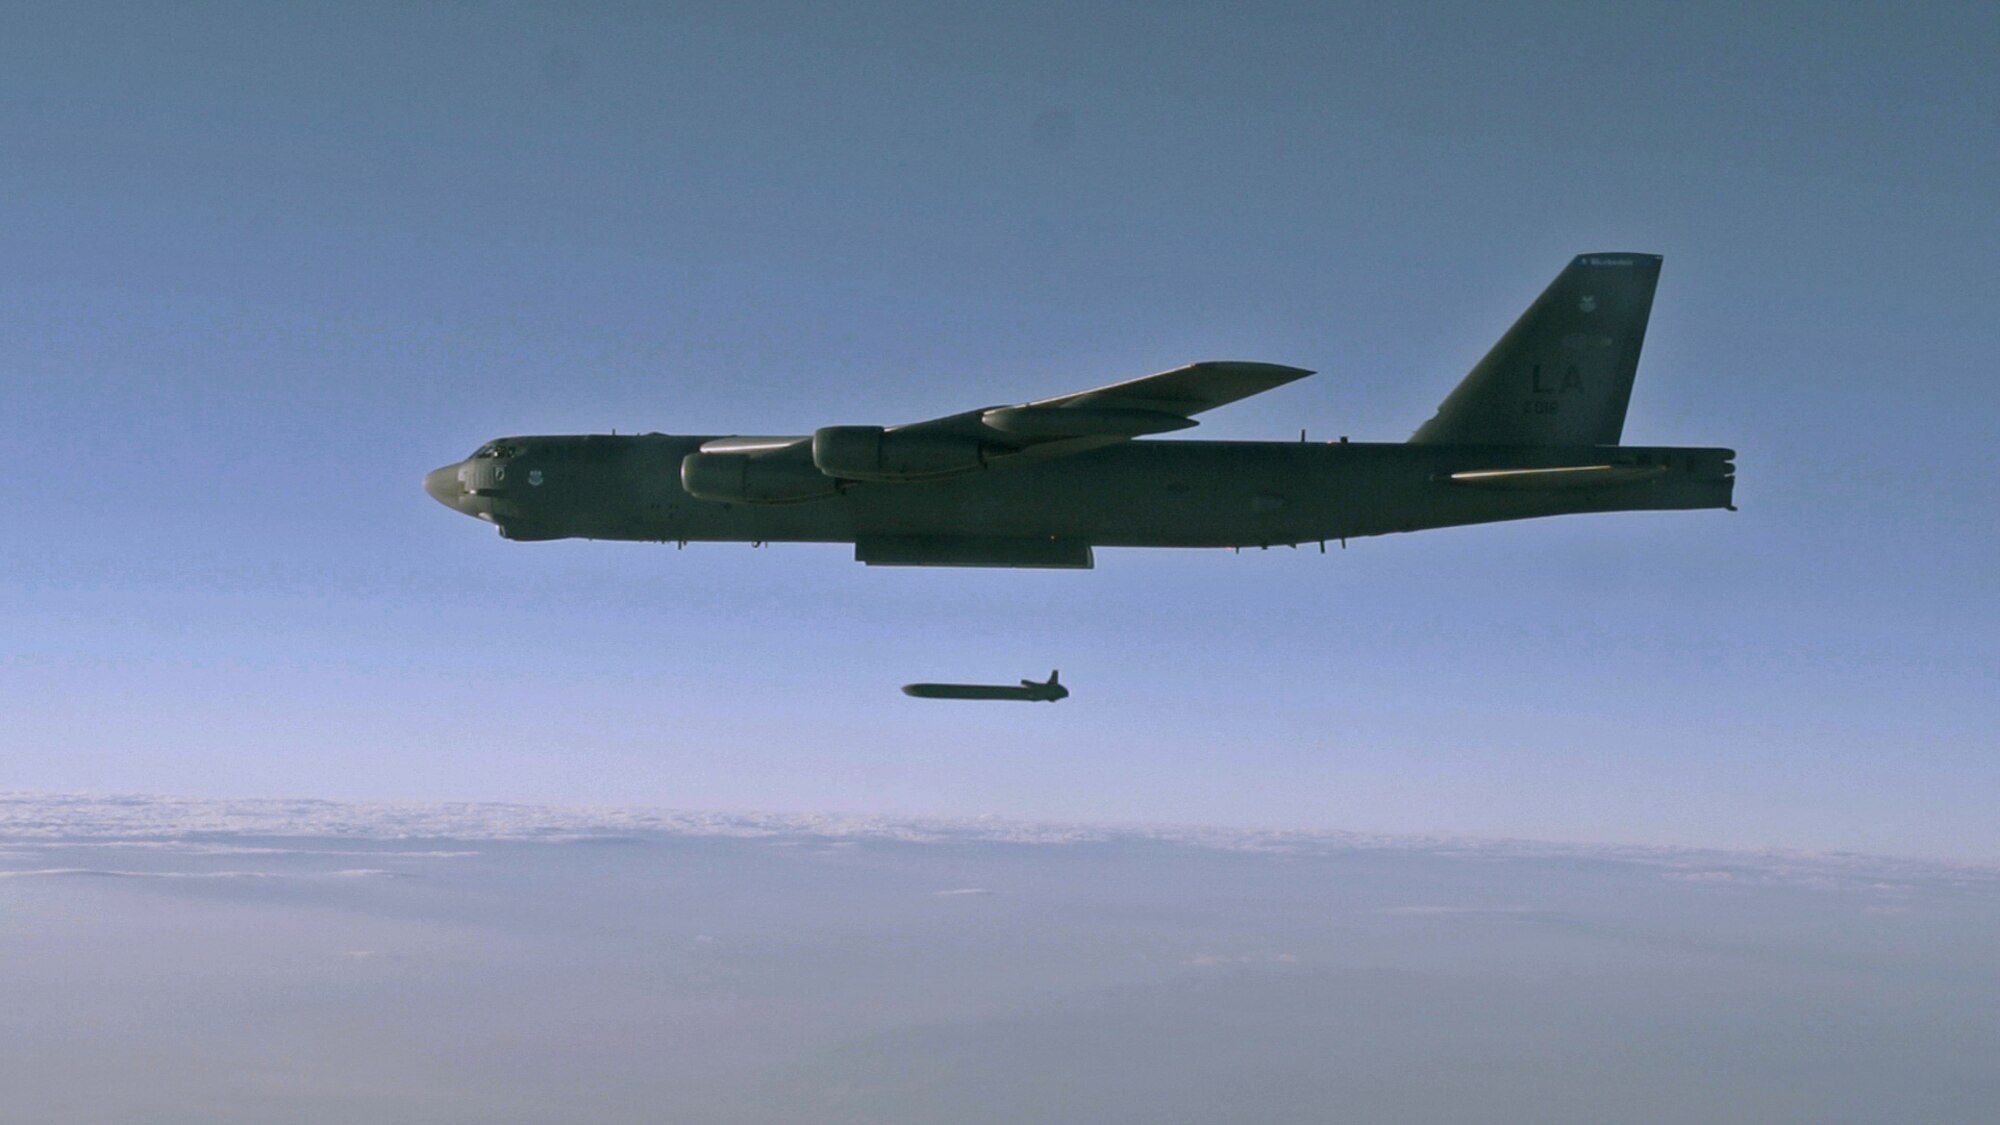 An unarmed AGM-86B Air-Launched Cruise Missile is released from a B-52H Stratofortress over the Utah Test and Training Range during a Nuclear Weapons System Evaluation Program sortie Sept. 22, 2014. Conducted by Airmen from the 2nd Bomb Wing, Barksdale Air Force Base, La., the launch was part of an end-to-end operational evaluation of 8th Air Force and Task Force 204’s ability to pull an ALCM from storage, load it aboard an aircraft, execute a simulated combat mission tasking and successfully deliver the weapon from the aircraft to its final target. (Photo by Staff Sgt. Roidan Carlson)